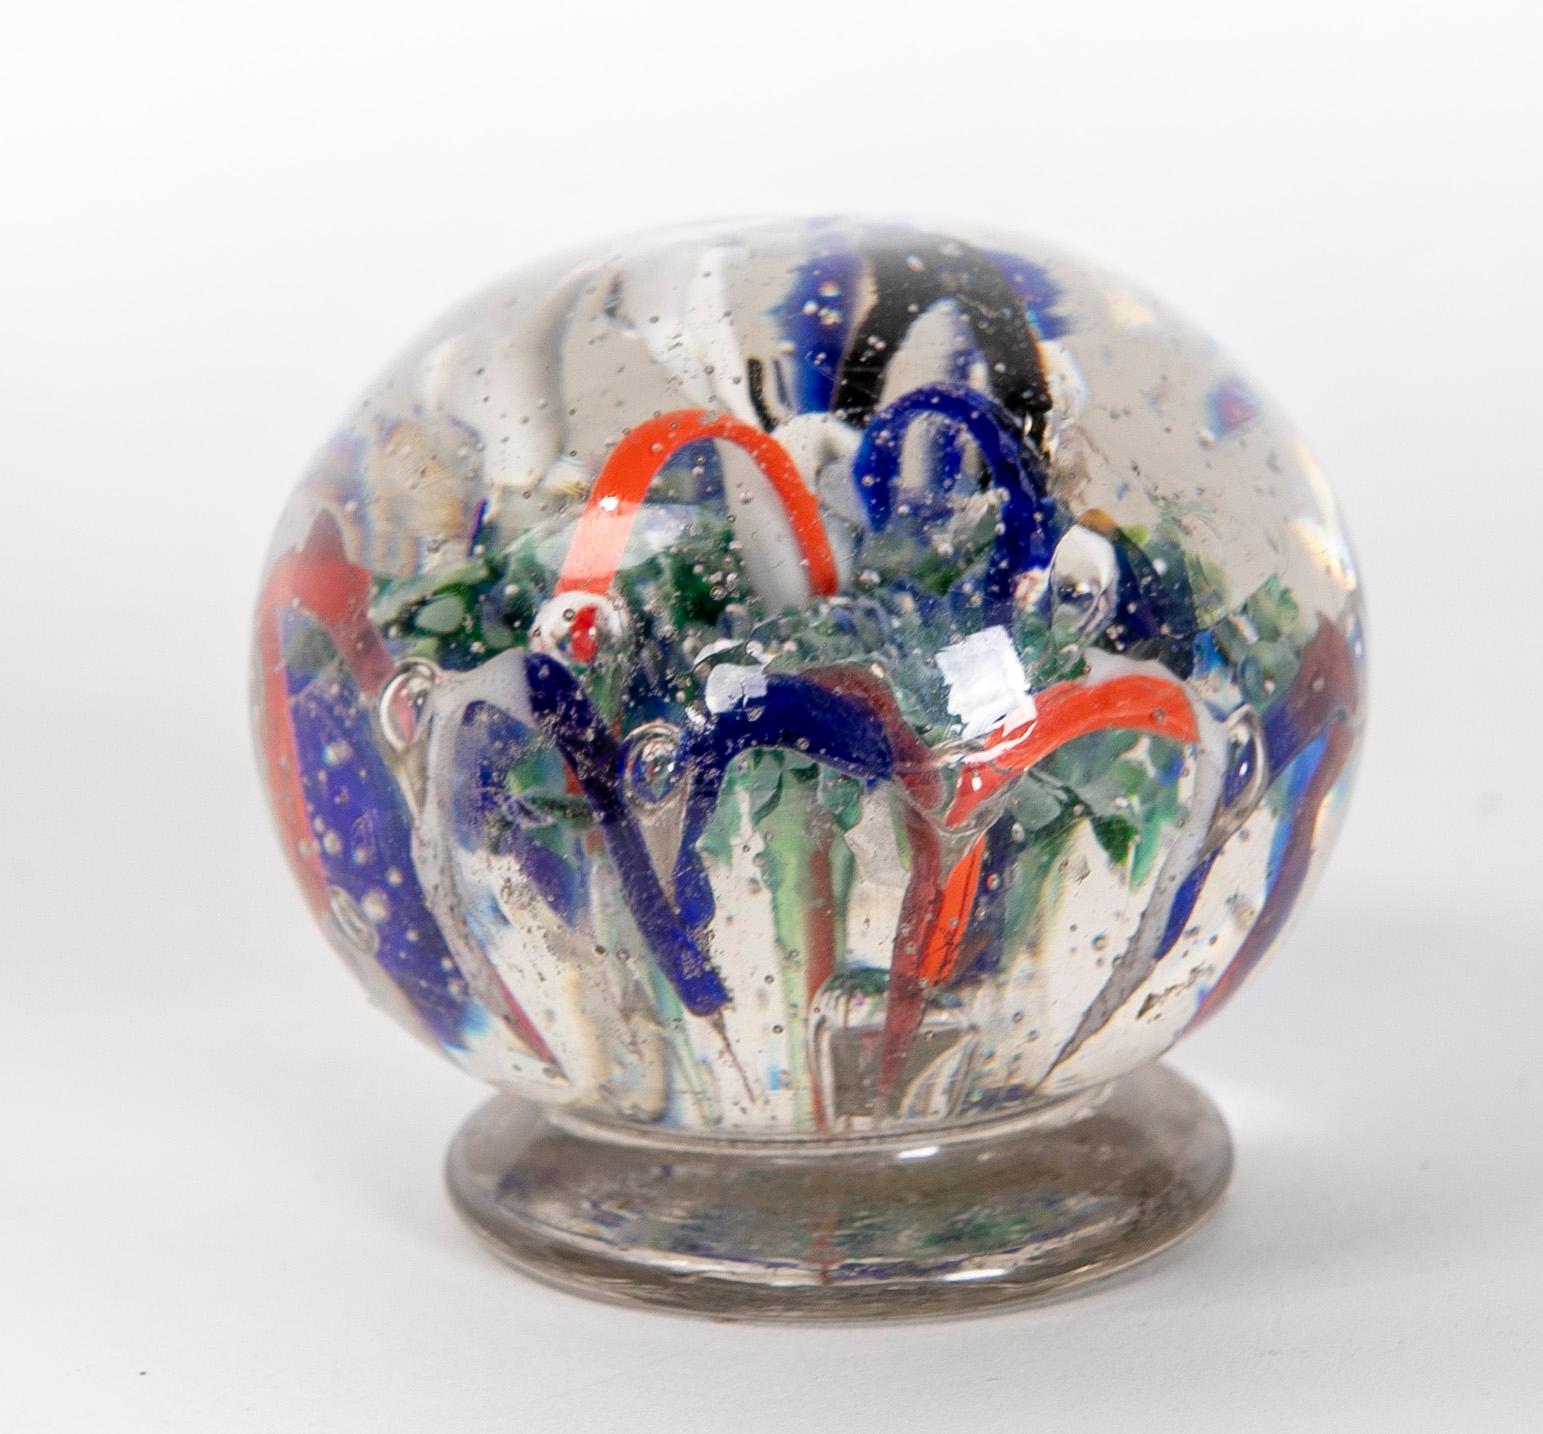  1950s Crystal Paperweight with Different Colors Decoration and Base For Sale 4